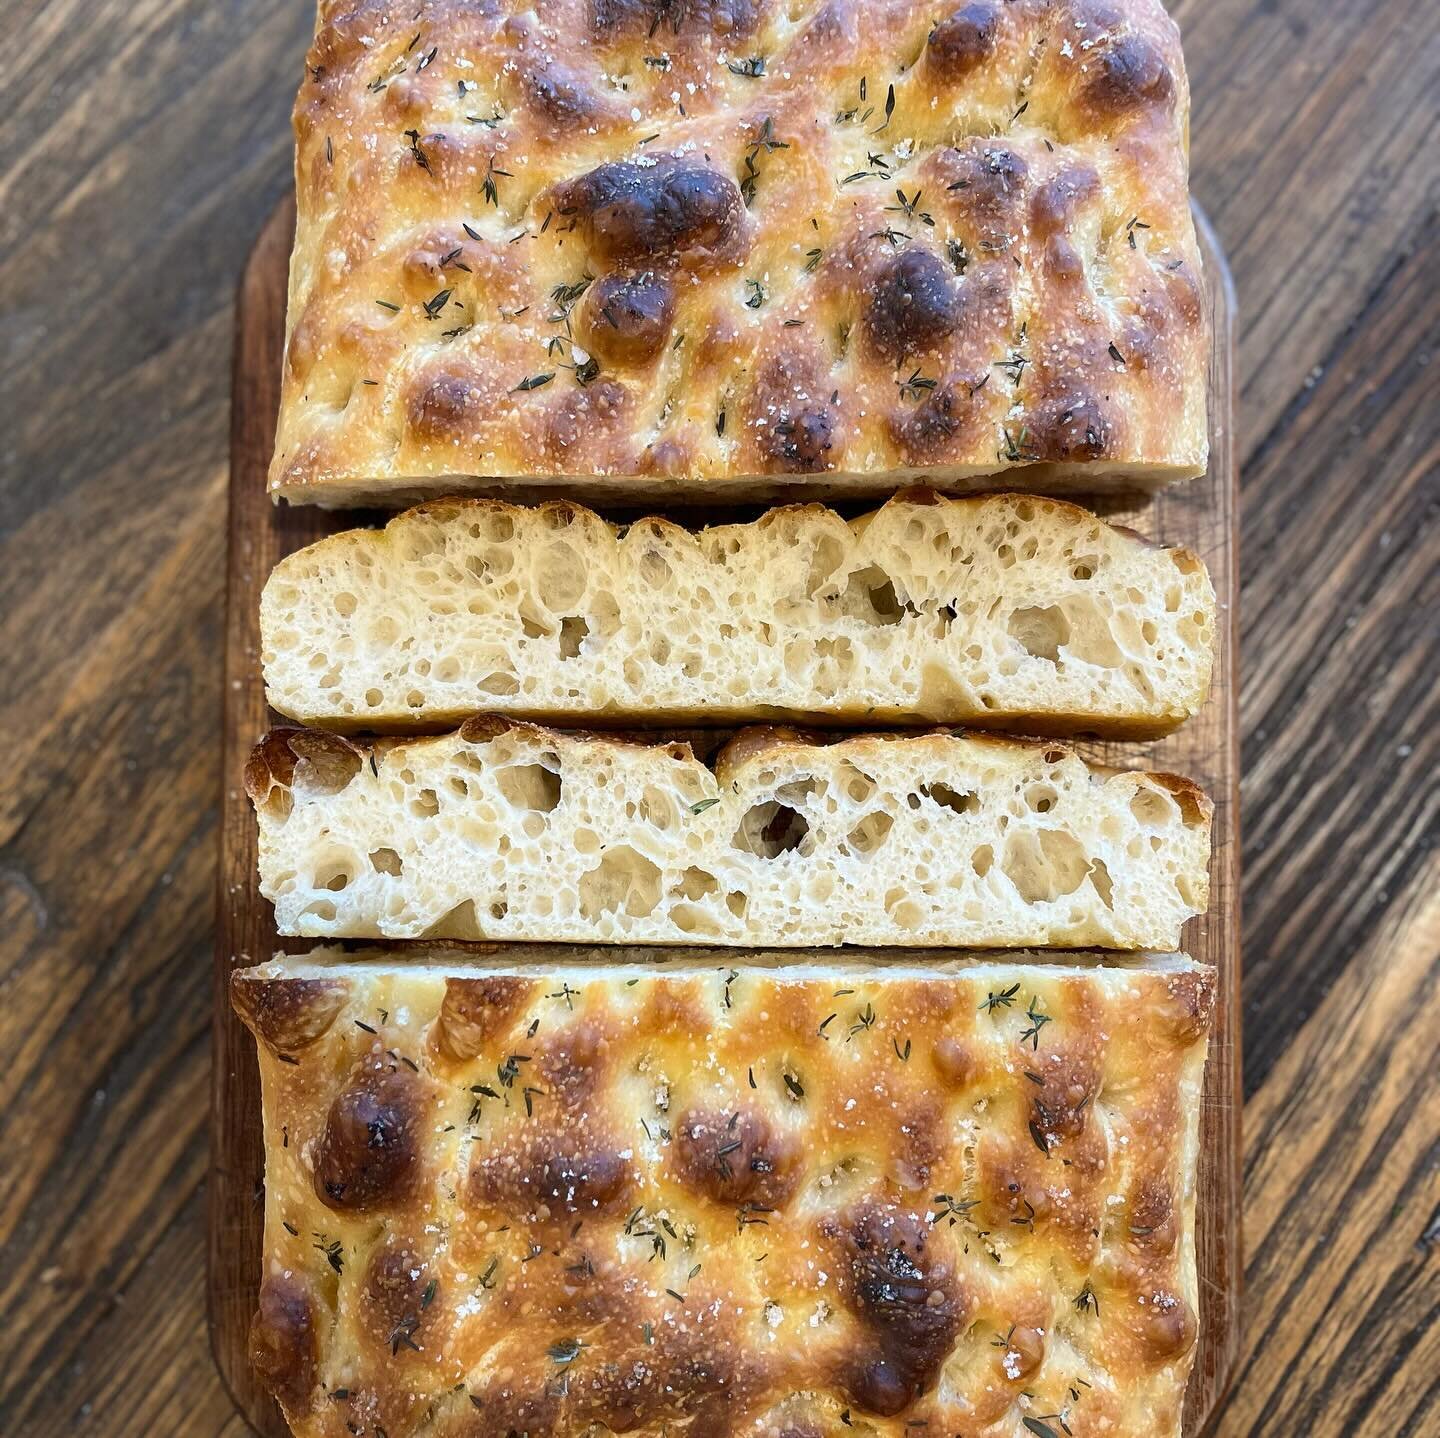 Sourdough focaccia, yum. Fresh thyme and sea salt, 80% H2O, 75/25 bread/plain flour, ~20% starter (well past it&rsquo;s prime given the heat the day before). 8 hour bulk at about 23-24C. Organic flour from @wholegrain_milling really soaks up the wate